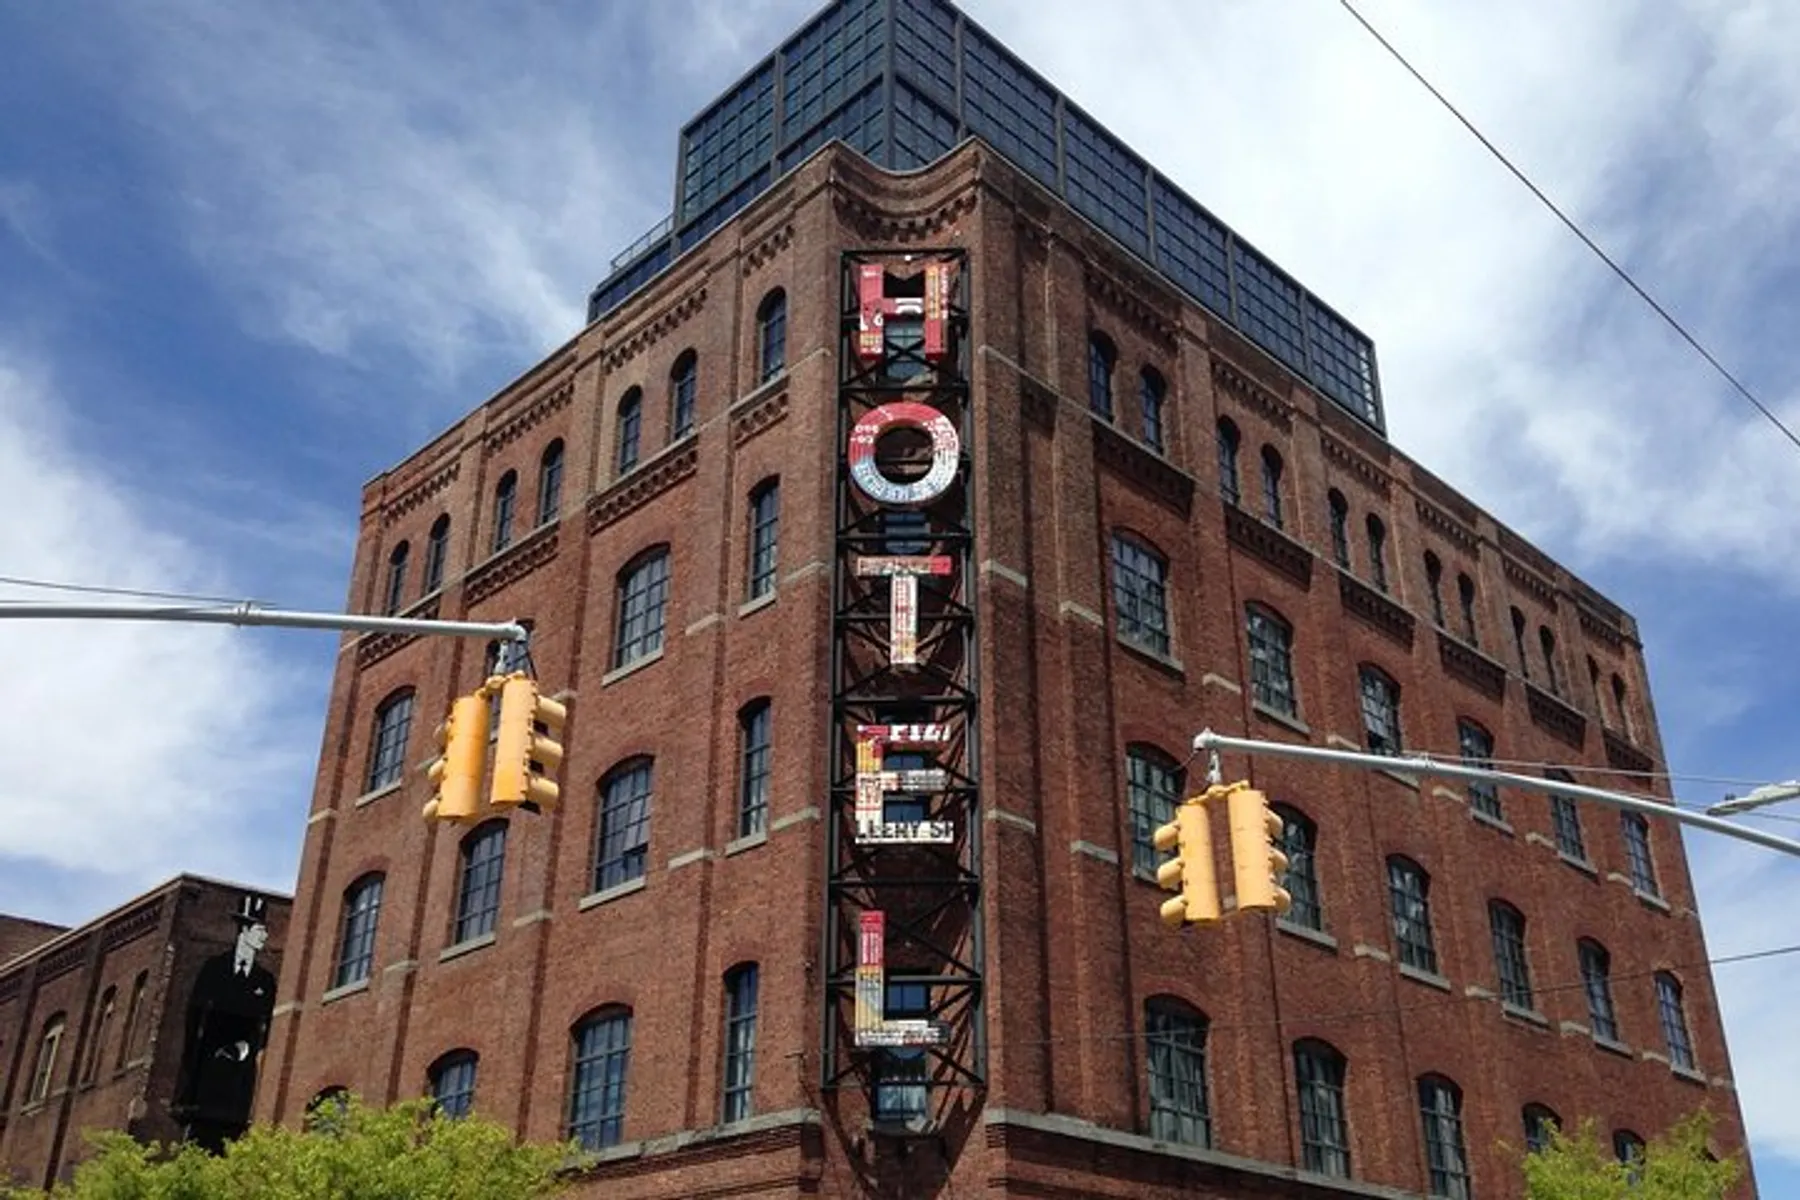 The image shows a tall brick building with a unique triangular shape featuring a fire escape and large letter signage on its side, set against a blue sky with scattered clouds, interspersed with traffic lights from an urban street perspective.